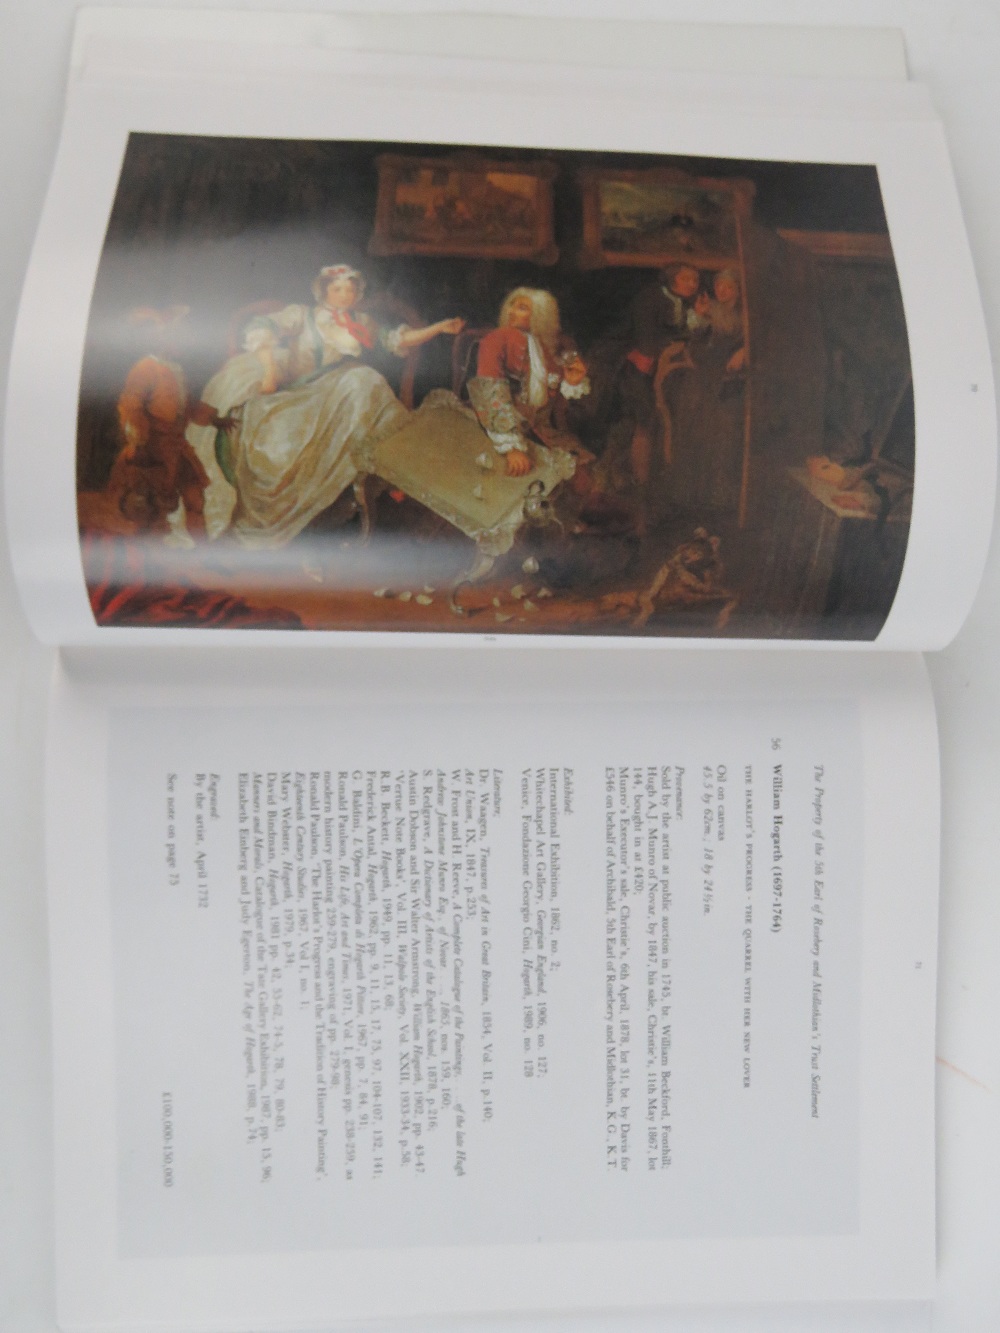 Catalogue; Sotherby's British Paintings 1500-1850 Sale London 10th April 1991. - Image 4 of 7